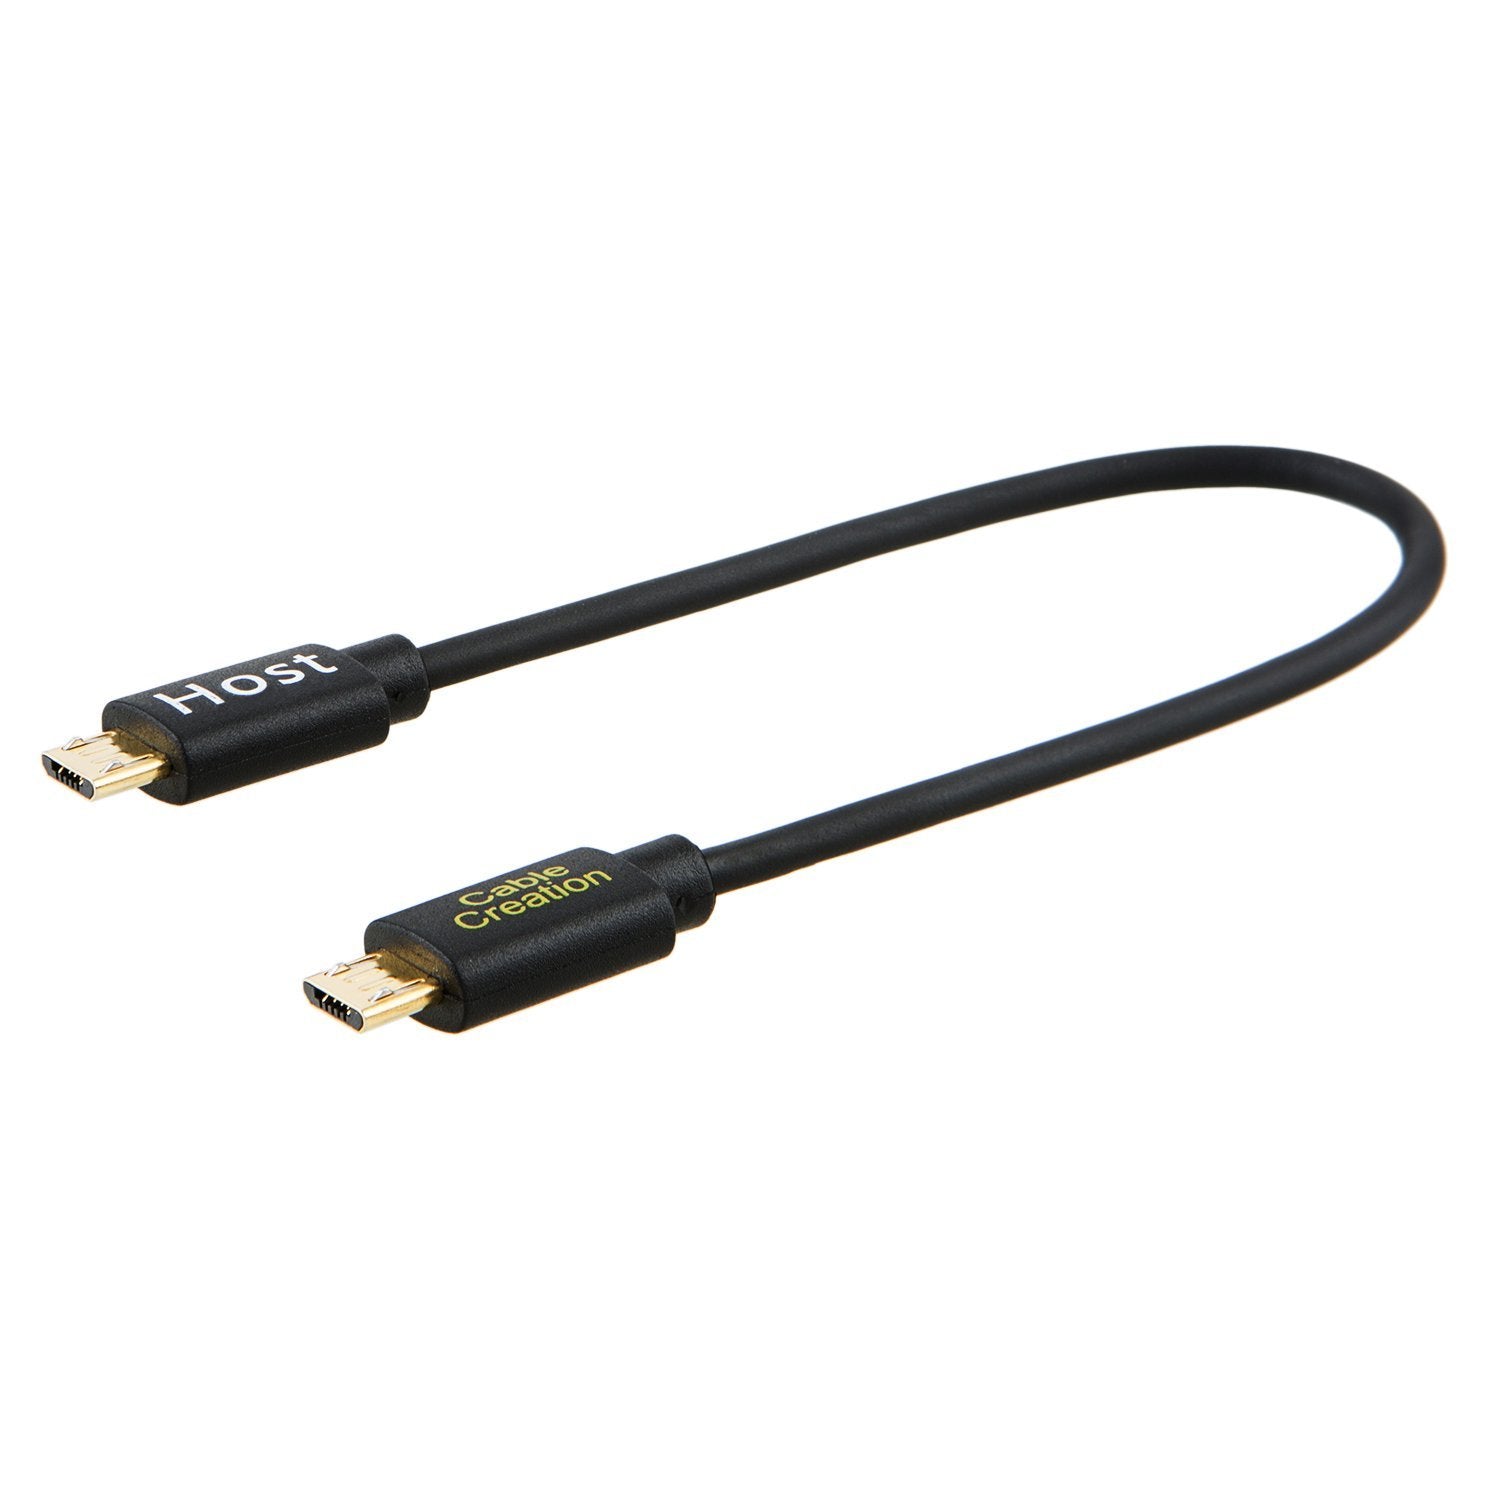 USB to Micro USB OTG Cable – CableCreation